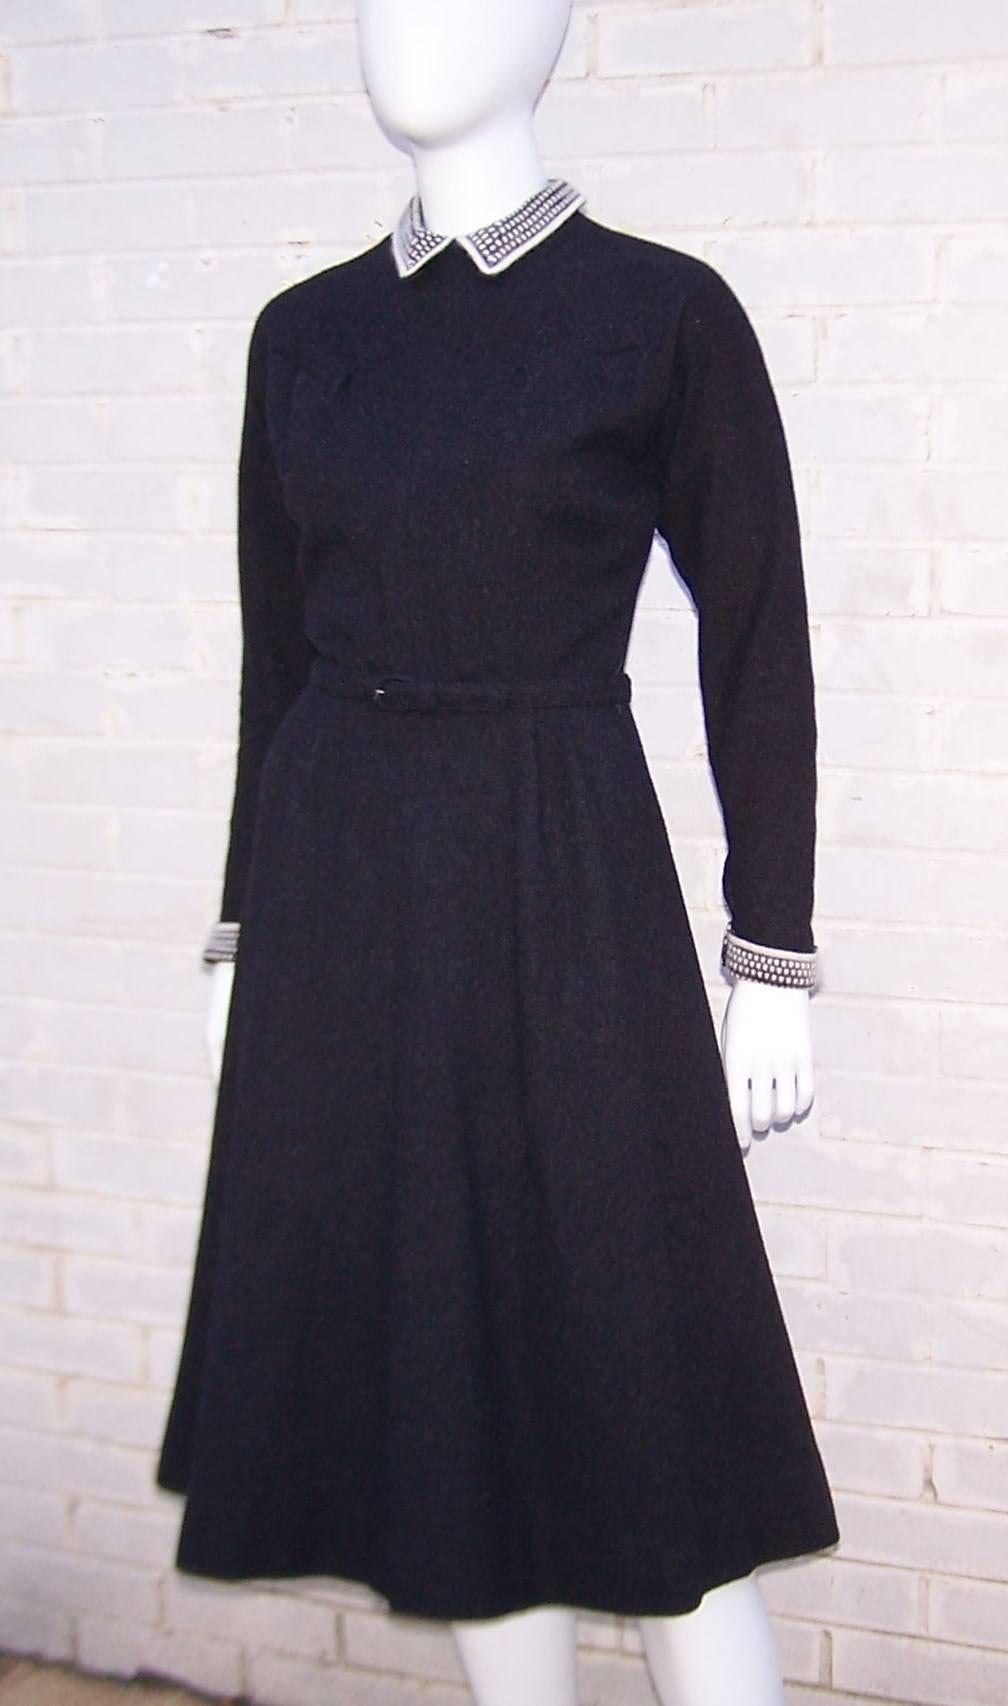 Women's School Girl Style 1950's Charcoal Gray Wool Dress With Angora Details